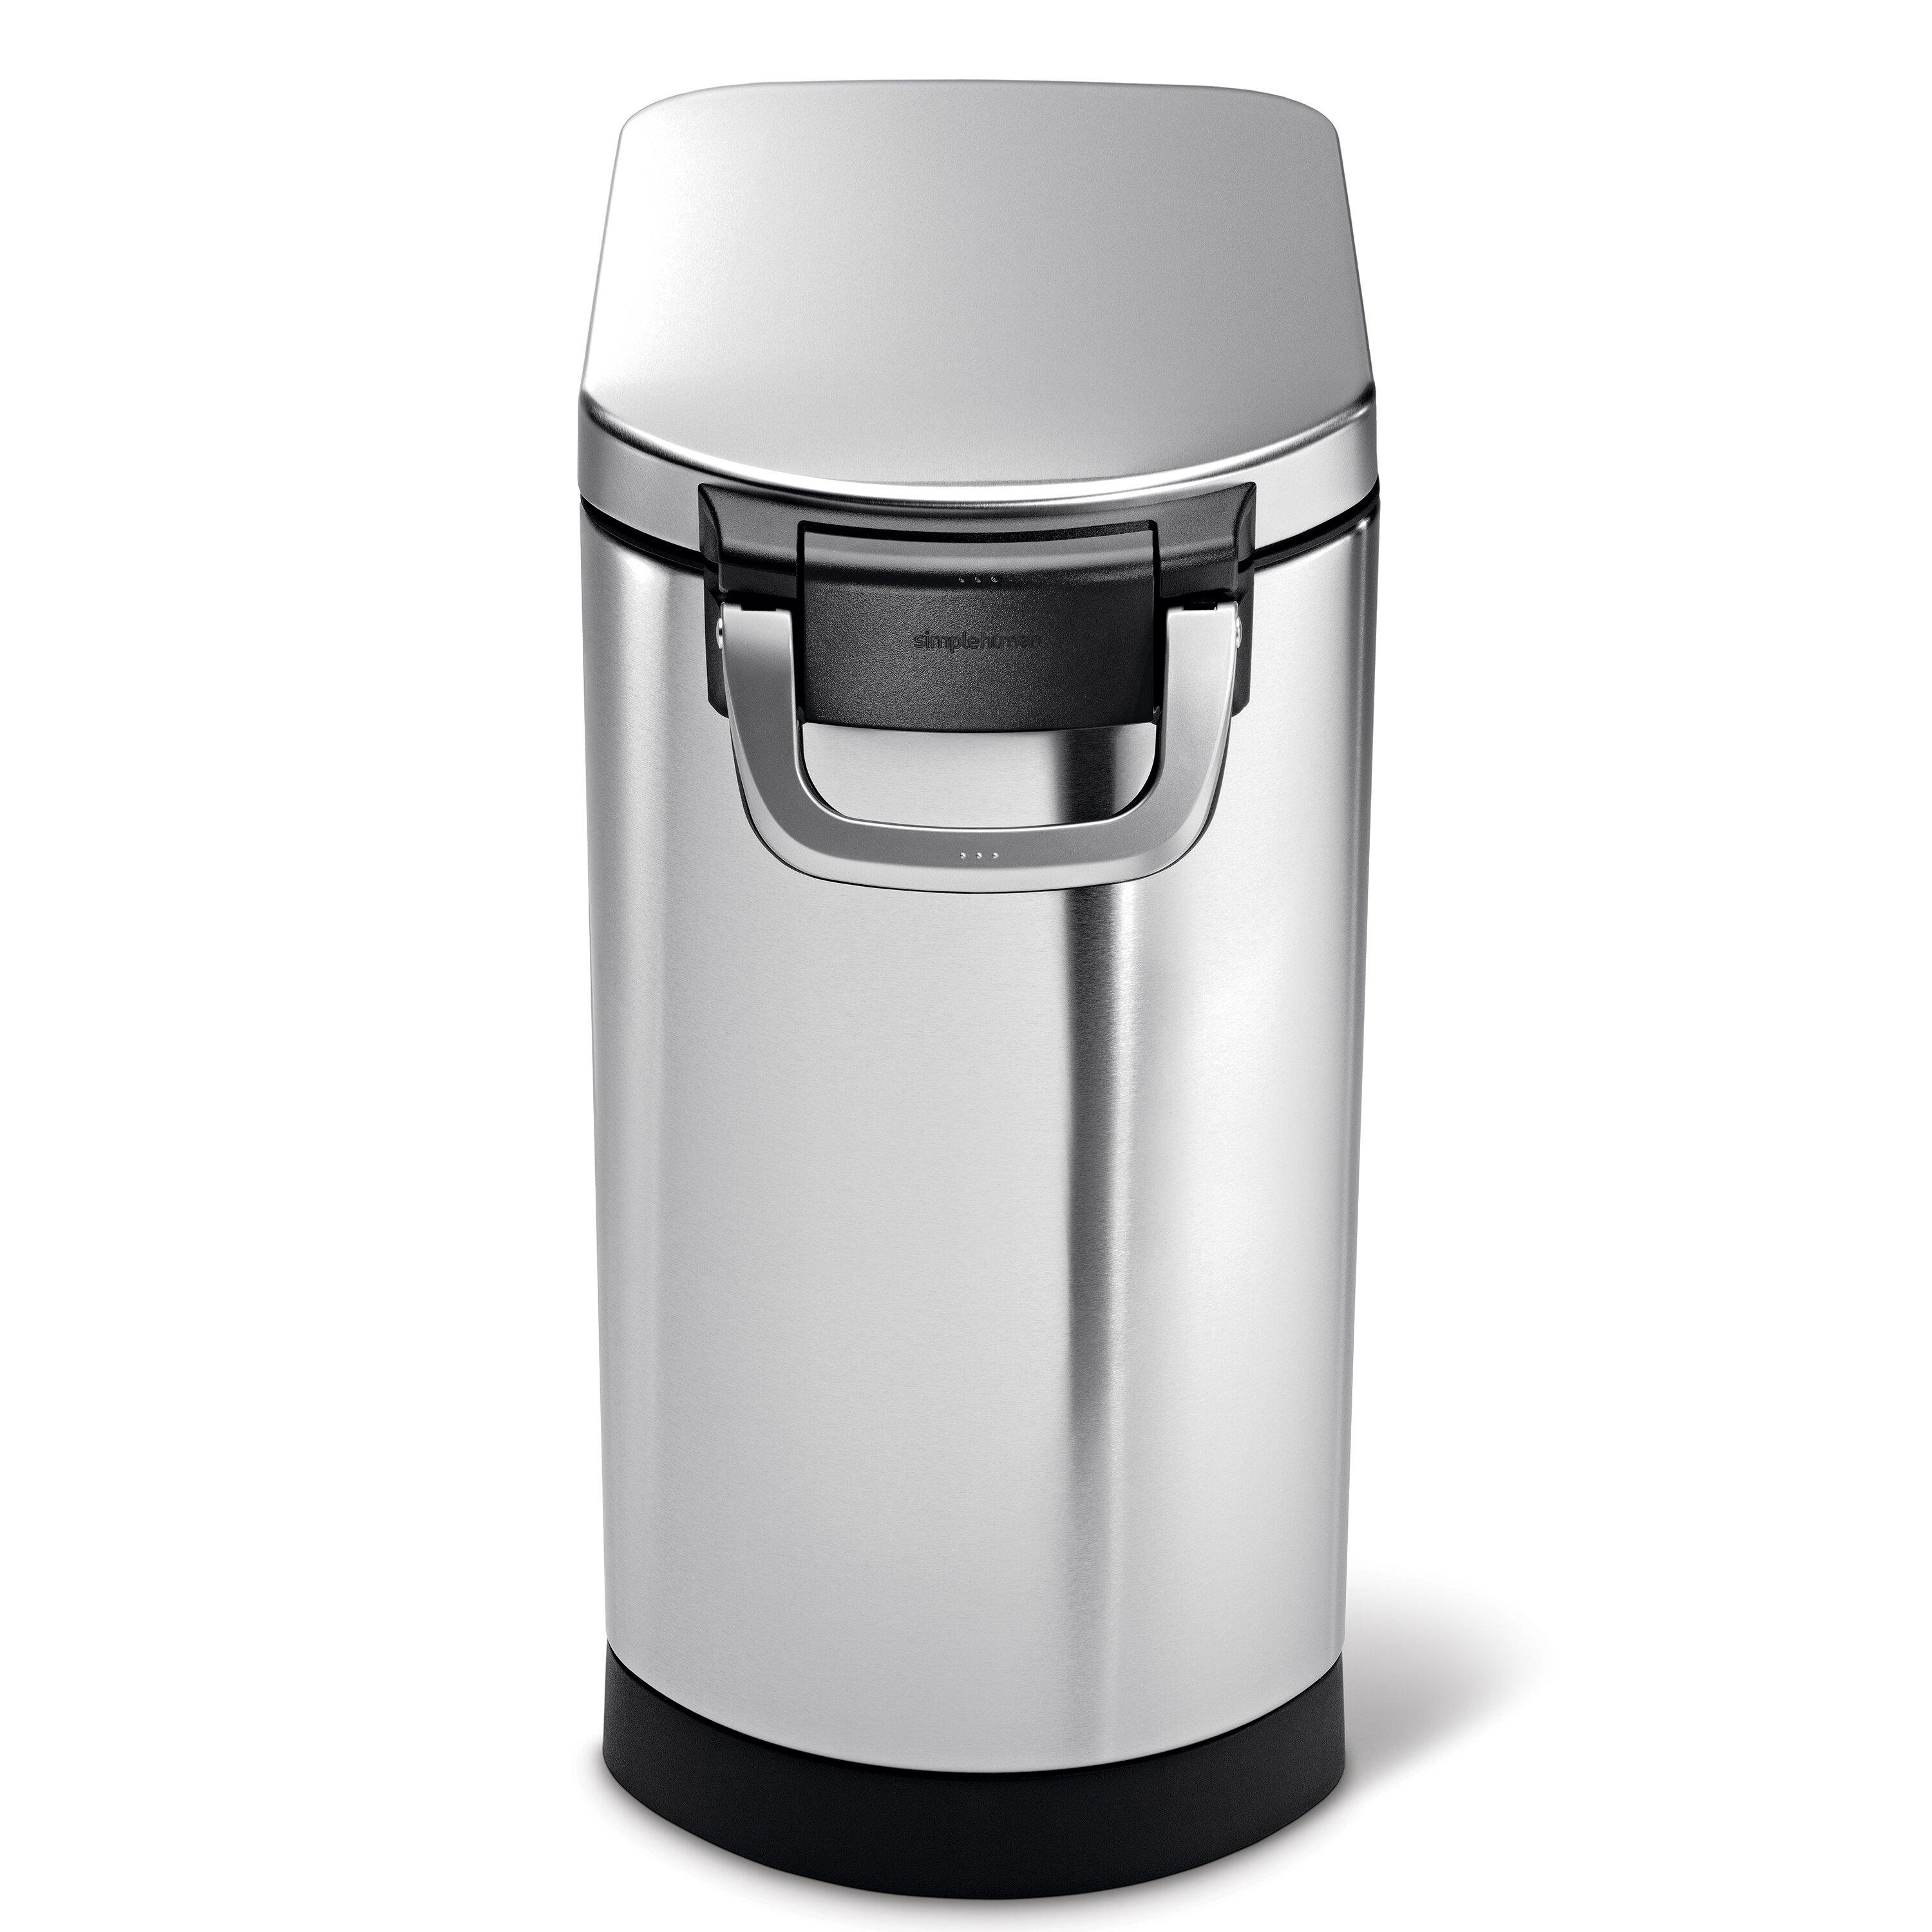 Simplehuman Pet Food Storage Container Stainless Steel for Dog